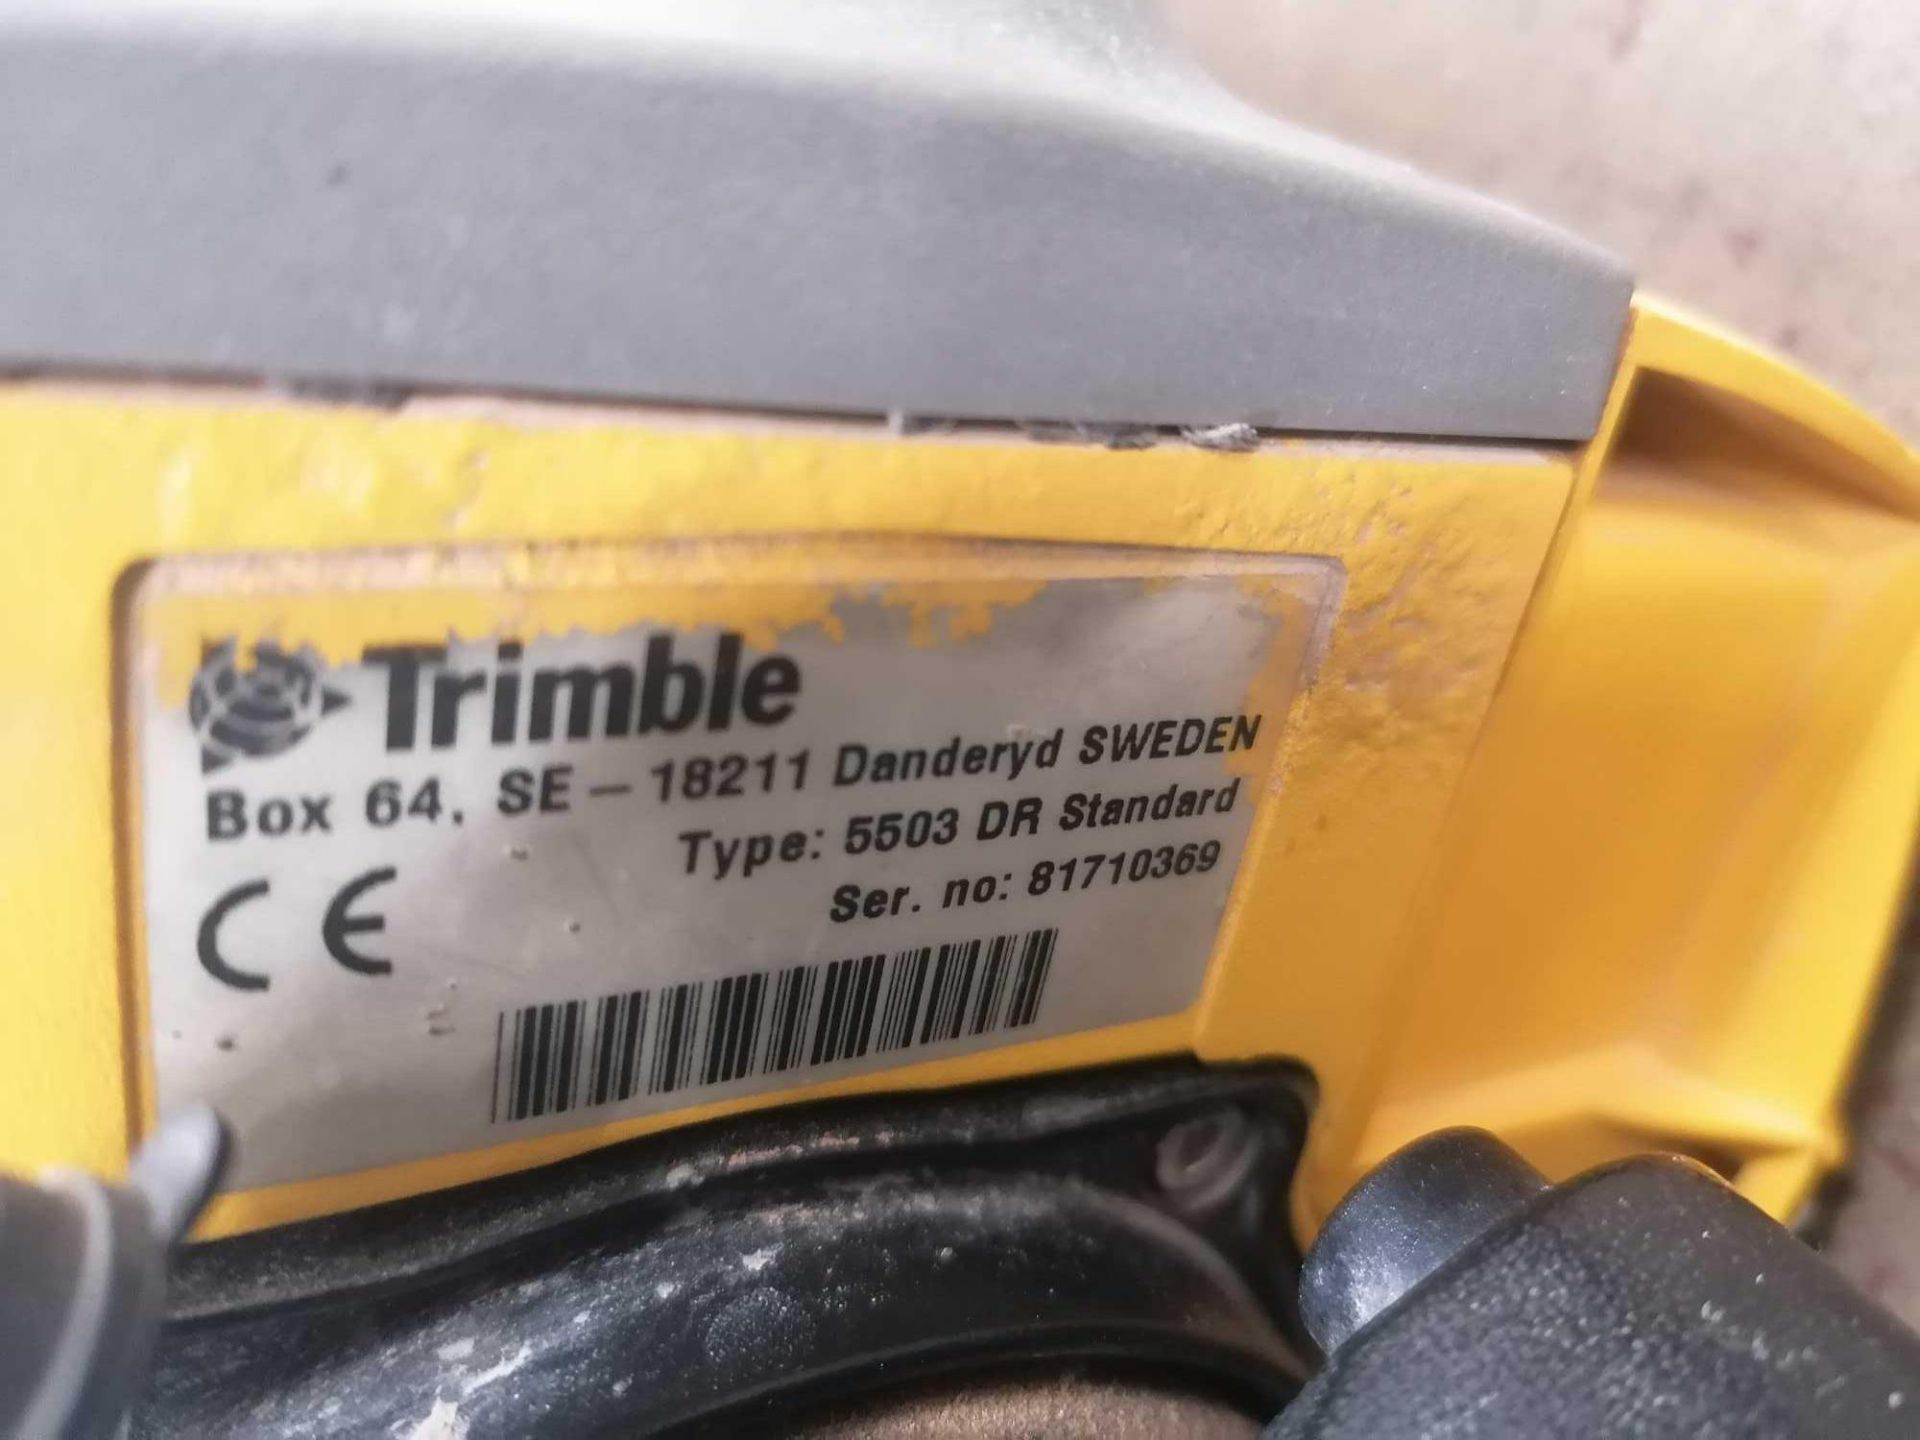 Trimble 5503 Total Station Laser, Model 5503 DR Standard, Serial # 81710369 with Attachments. - Image 5 of 20